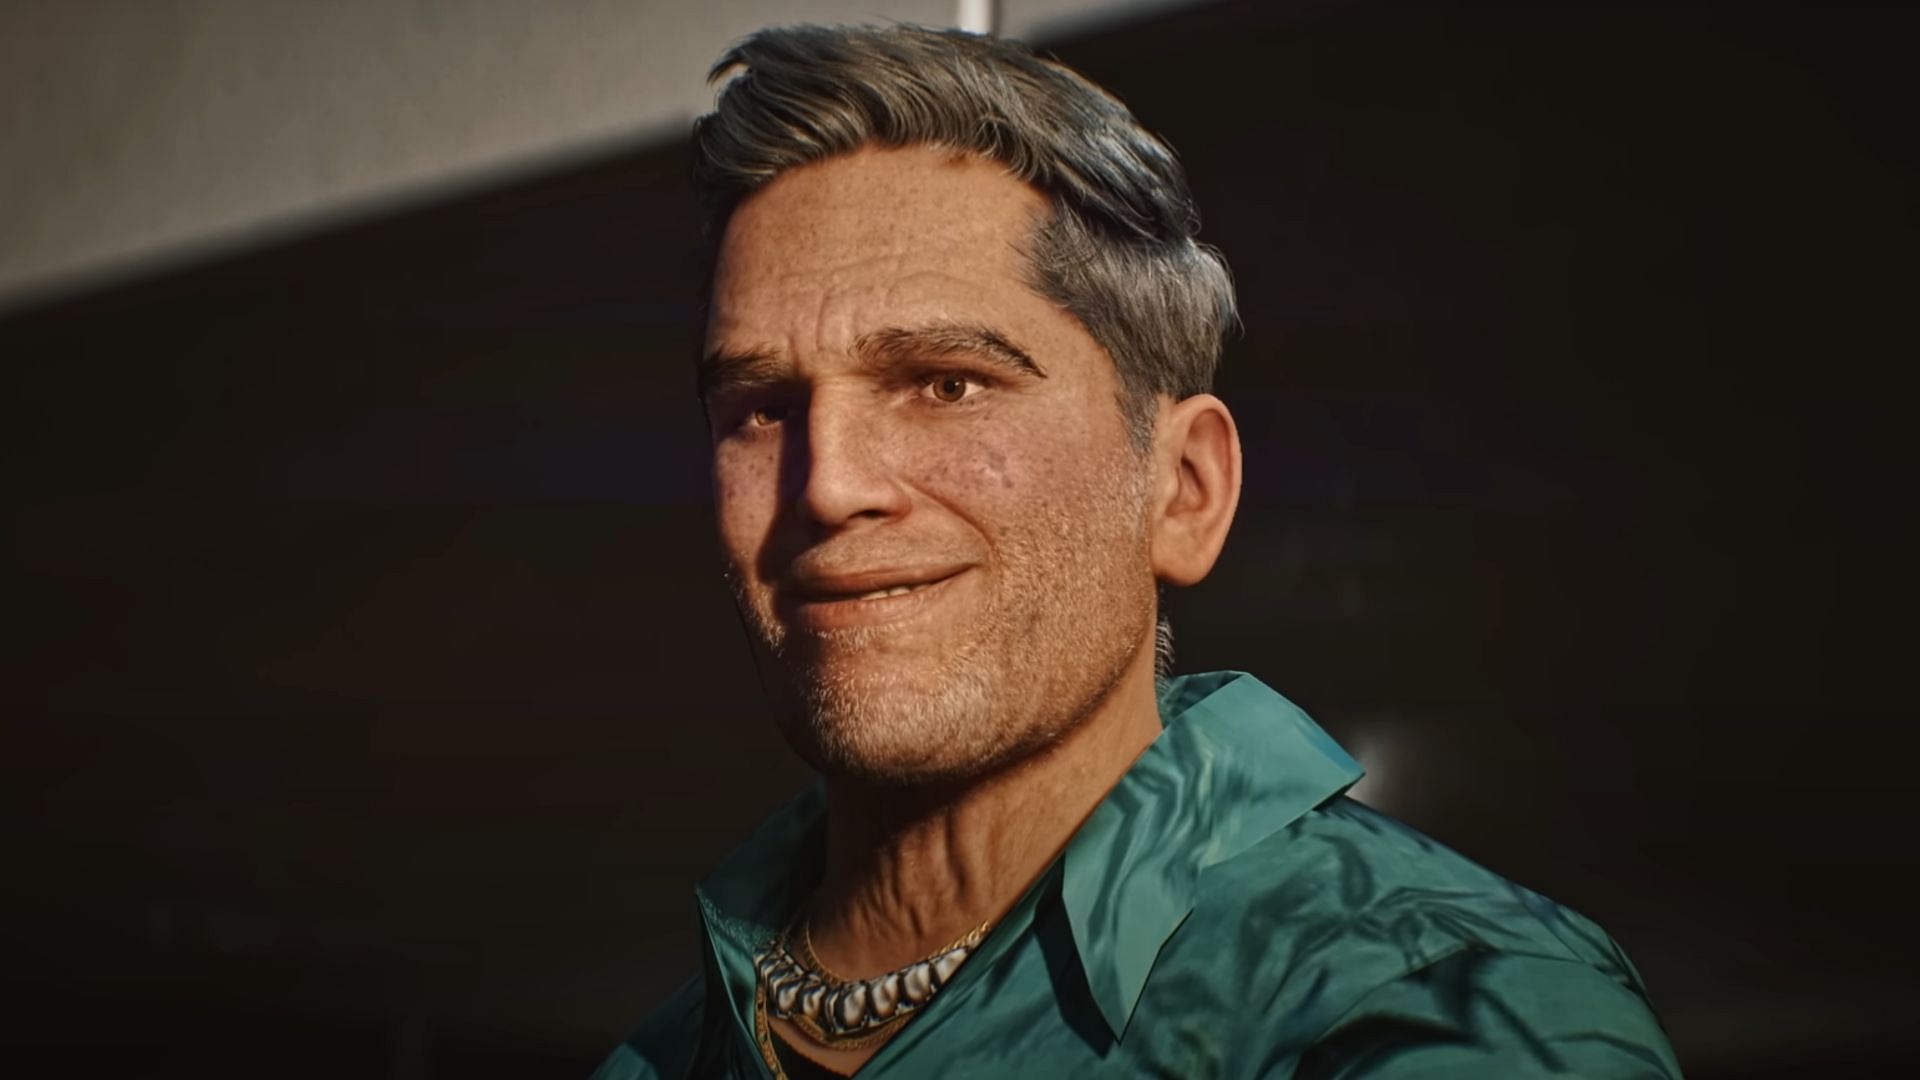 Tommy Vercetti would looks much older 37 years later